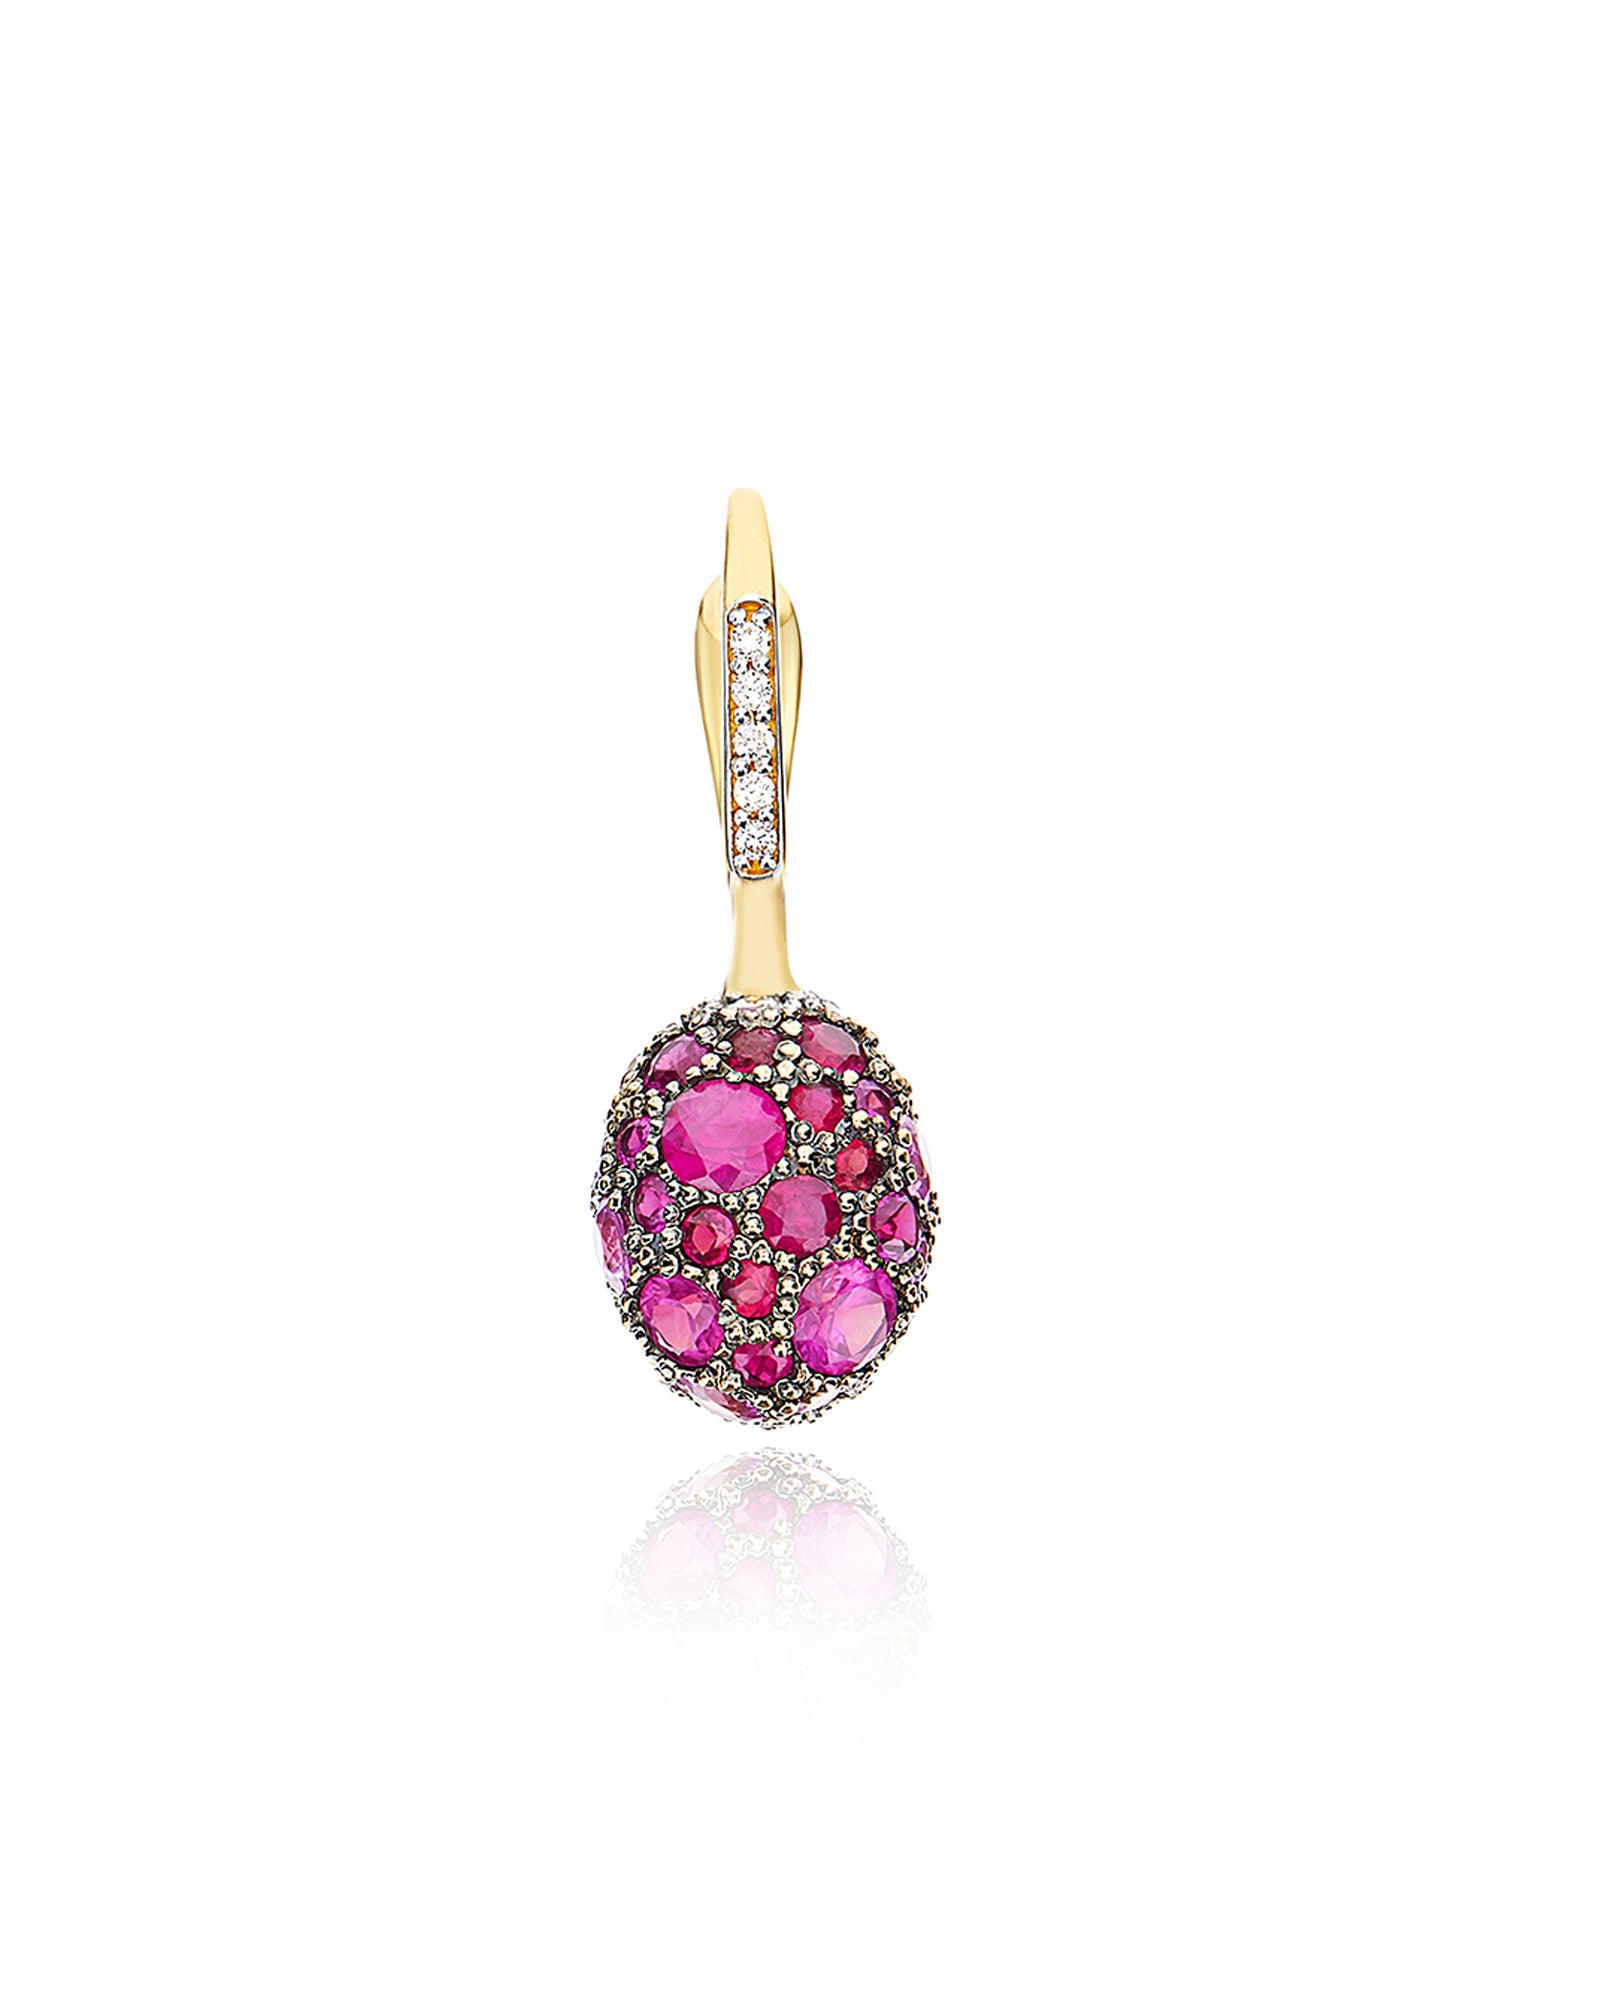 "Reverse" Ciliegina Gold, Pink Sapphires, Rubies, White Australian Opal and Diamonds Double-face Ball Drop Single Earring (SMALL)